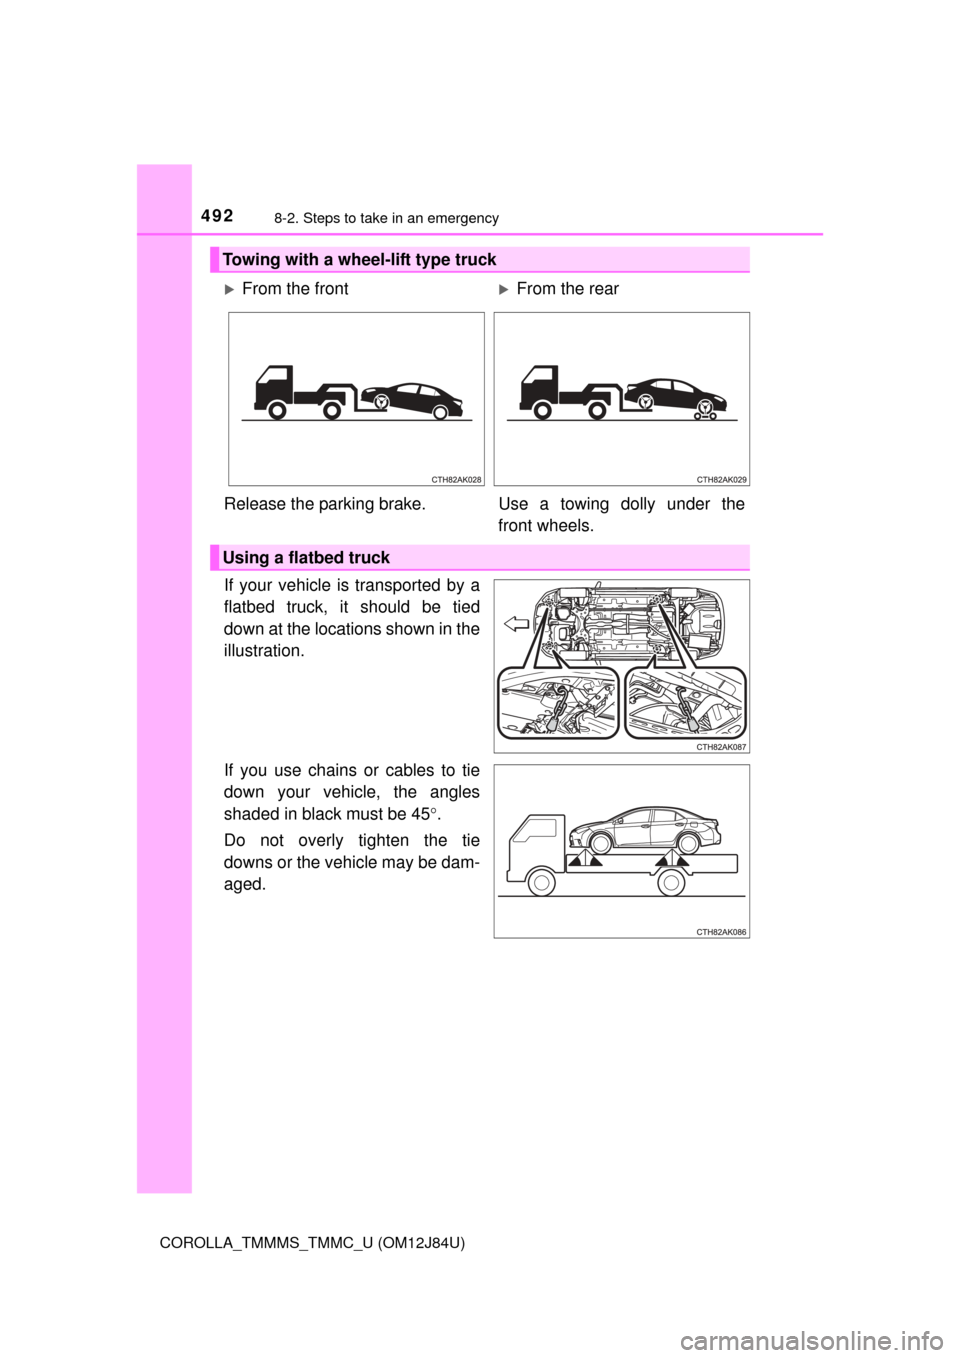 TOYOTA COROLLA 2016 11.G Service Manual 4928-2. Steps to take in an emergency
COROLLA_TMMMS_TMMC_U (OM12J84U)
If your vehicle is transported by a
flatbed truck, it should be tied
down at the locations shown in the
illustration.
If you use c